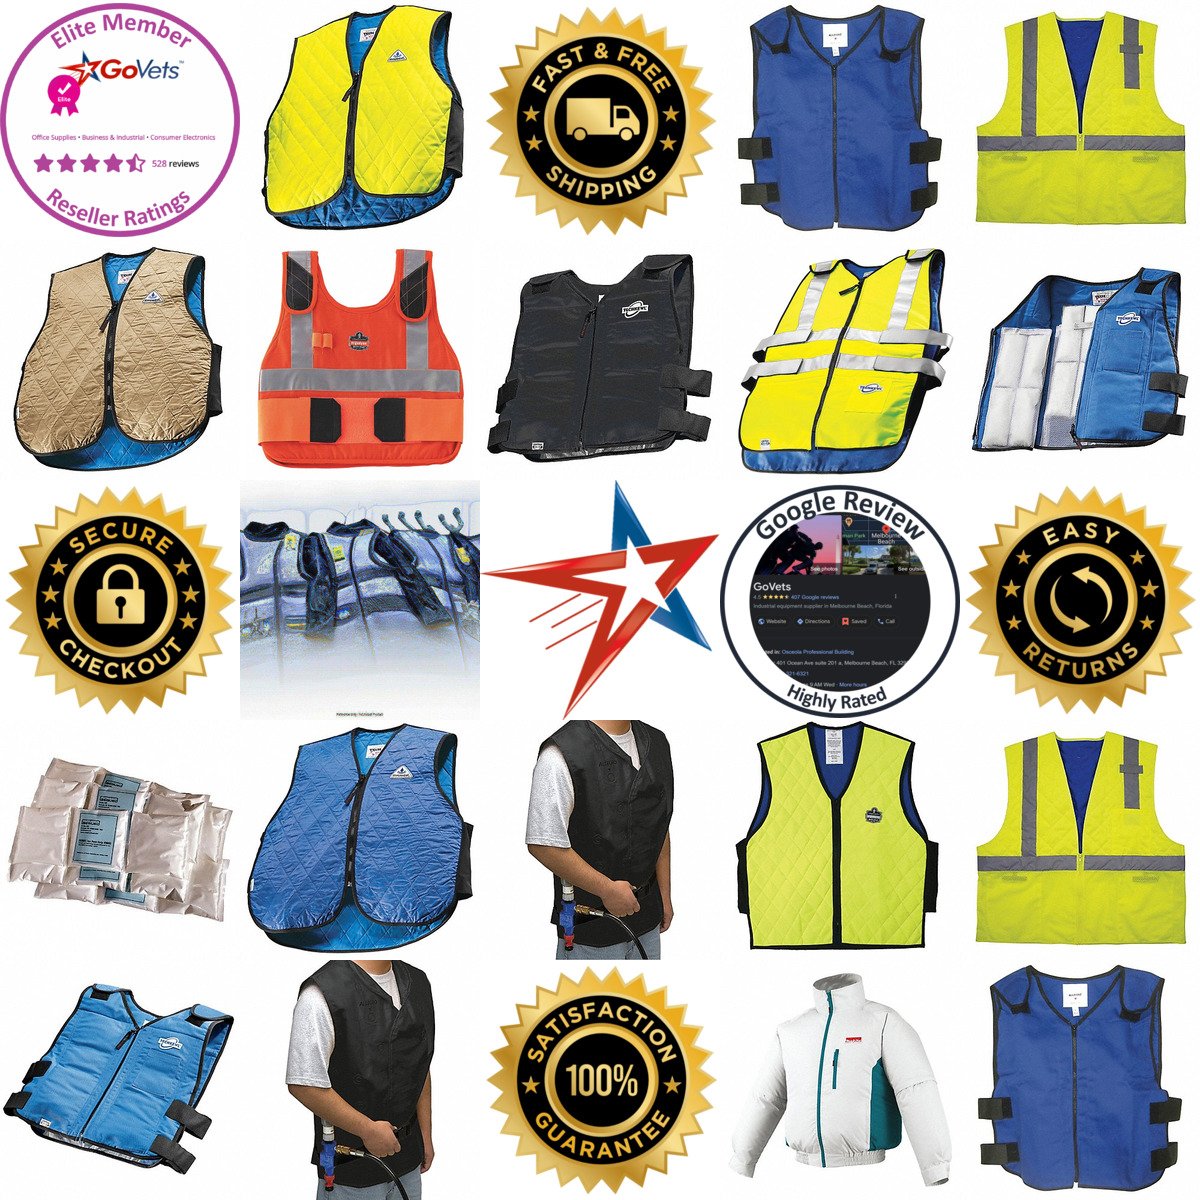 A selection of Cooling Vests and Jackets products on GoVets